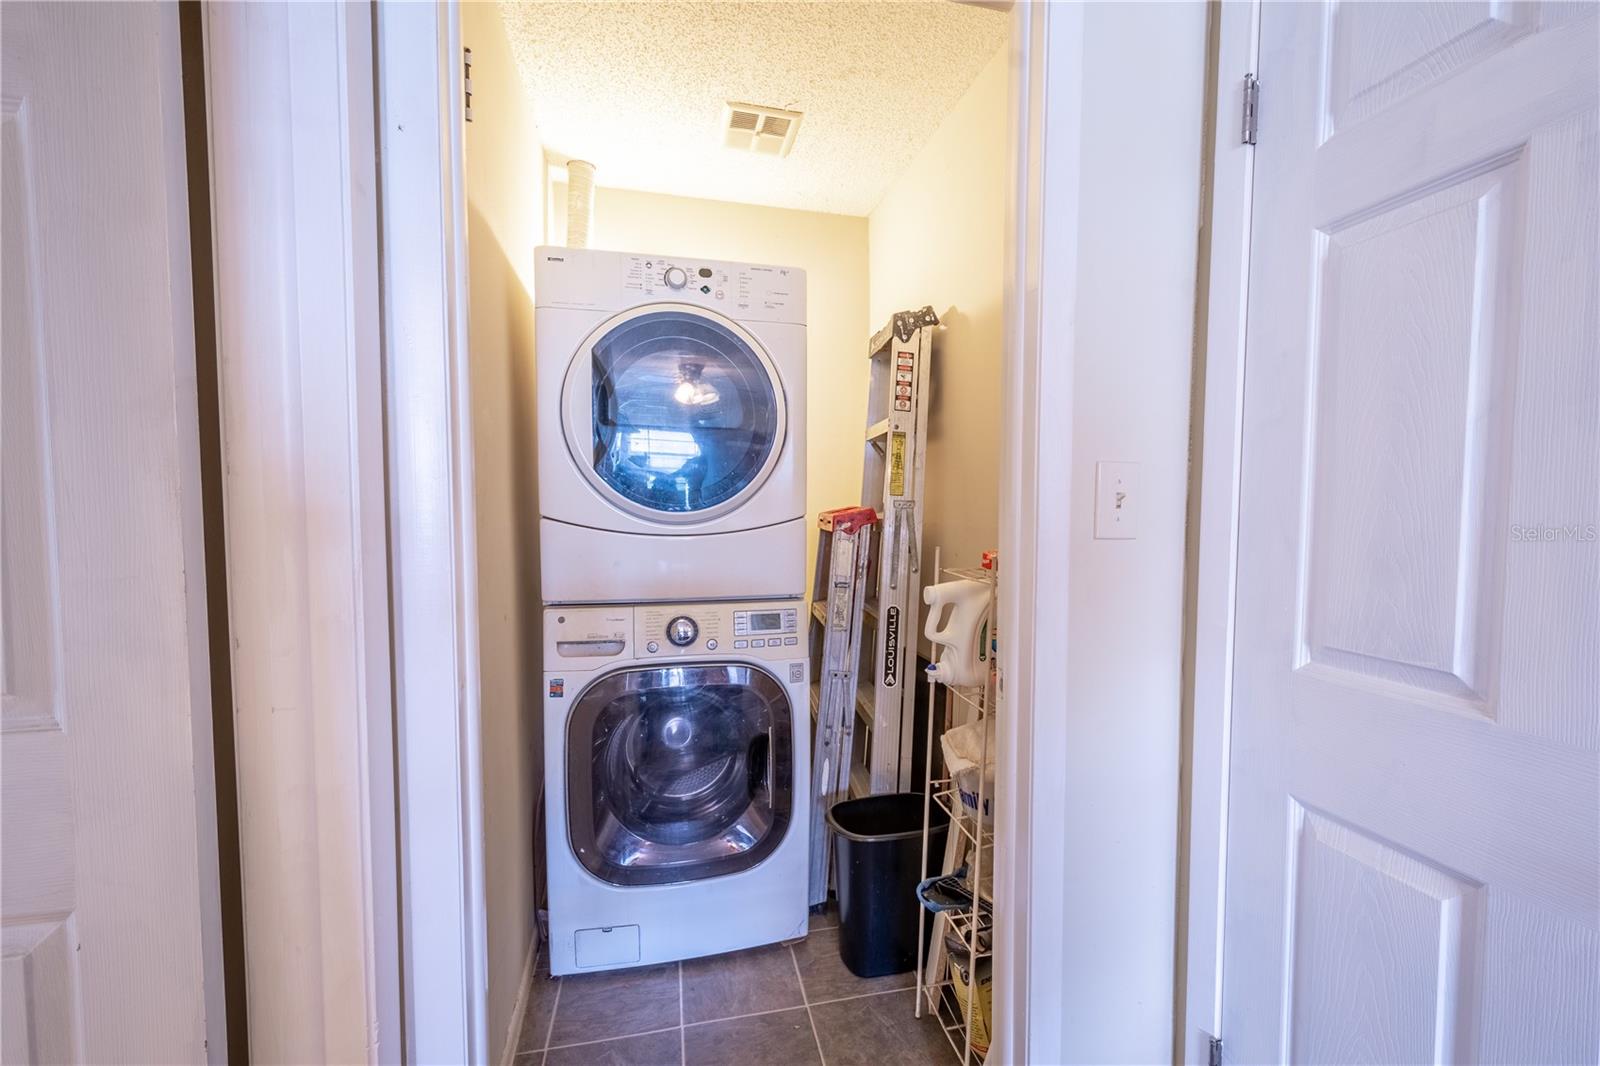 The half bath has been converted into a laundry room but can easily be converted back to a half bath.